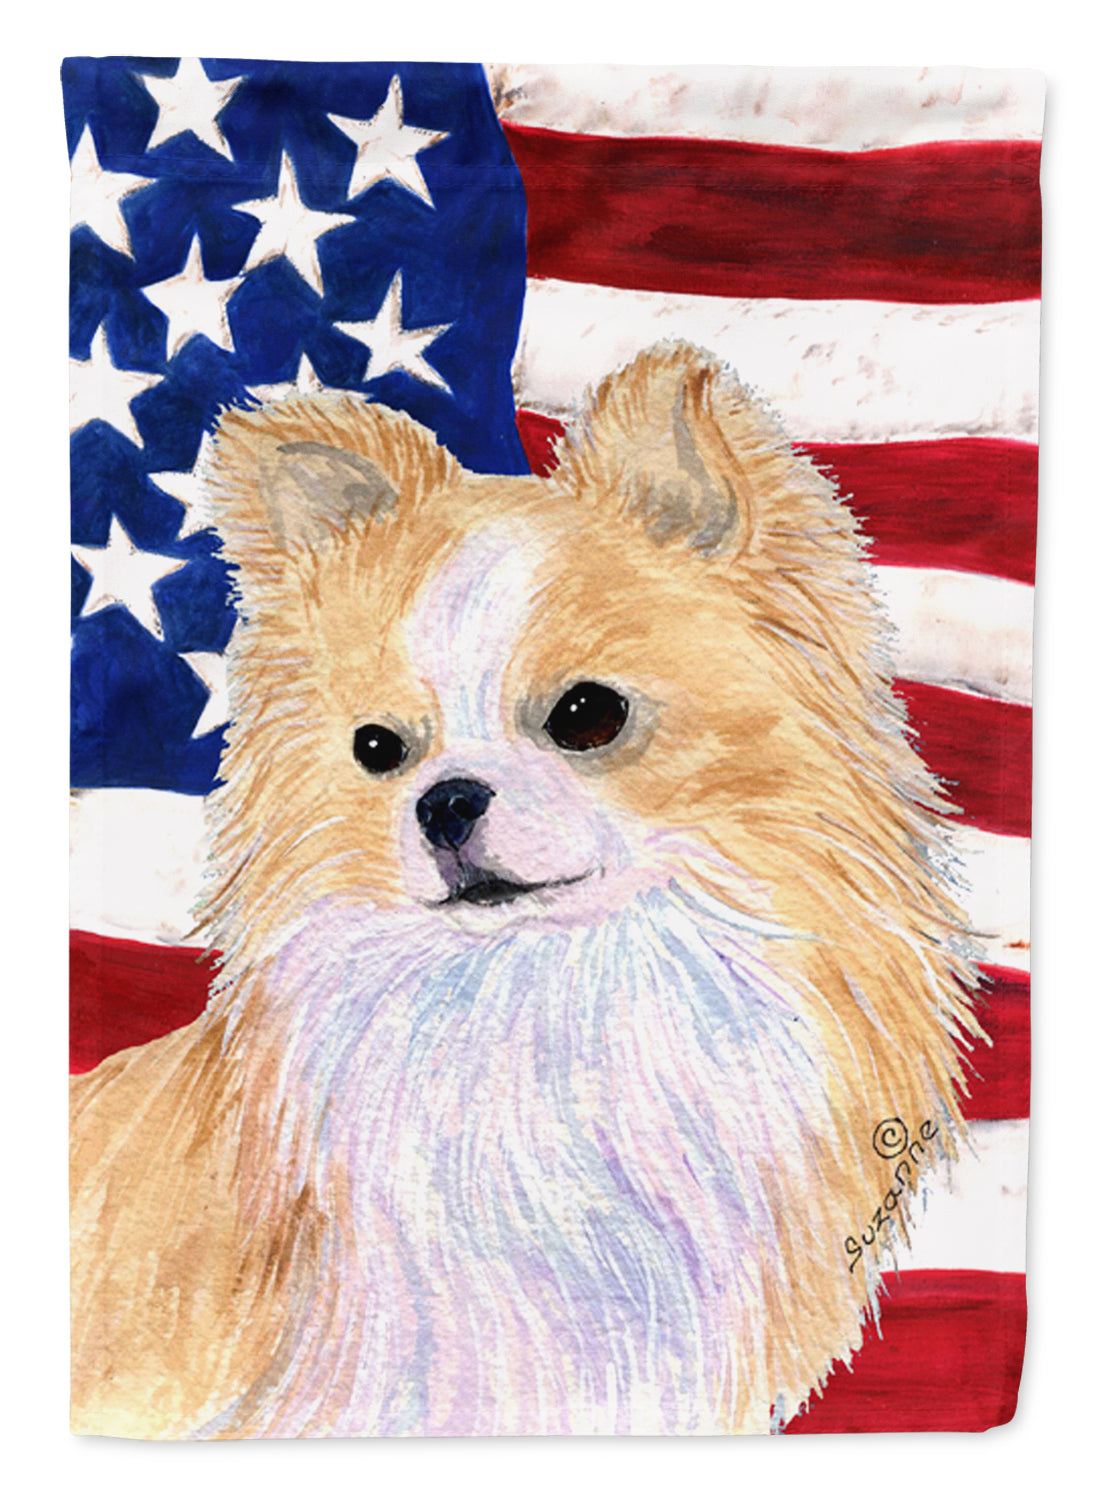 USA American Flag with Chihuahua Flag Garden Size.